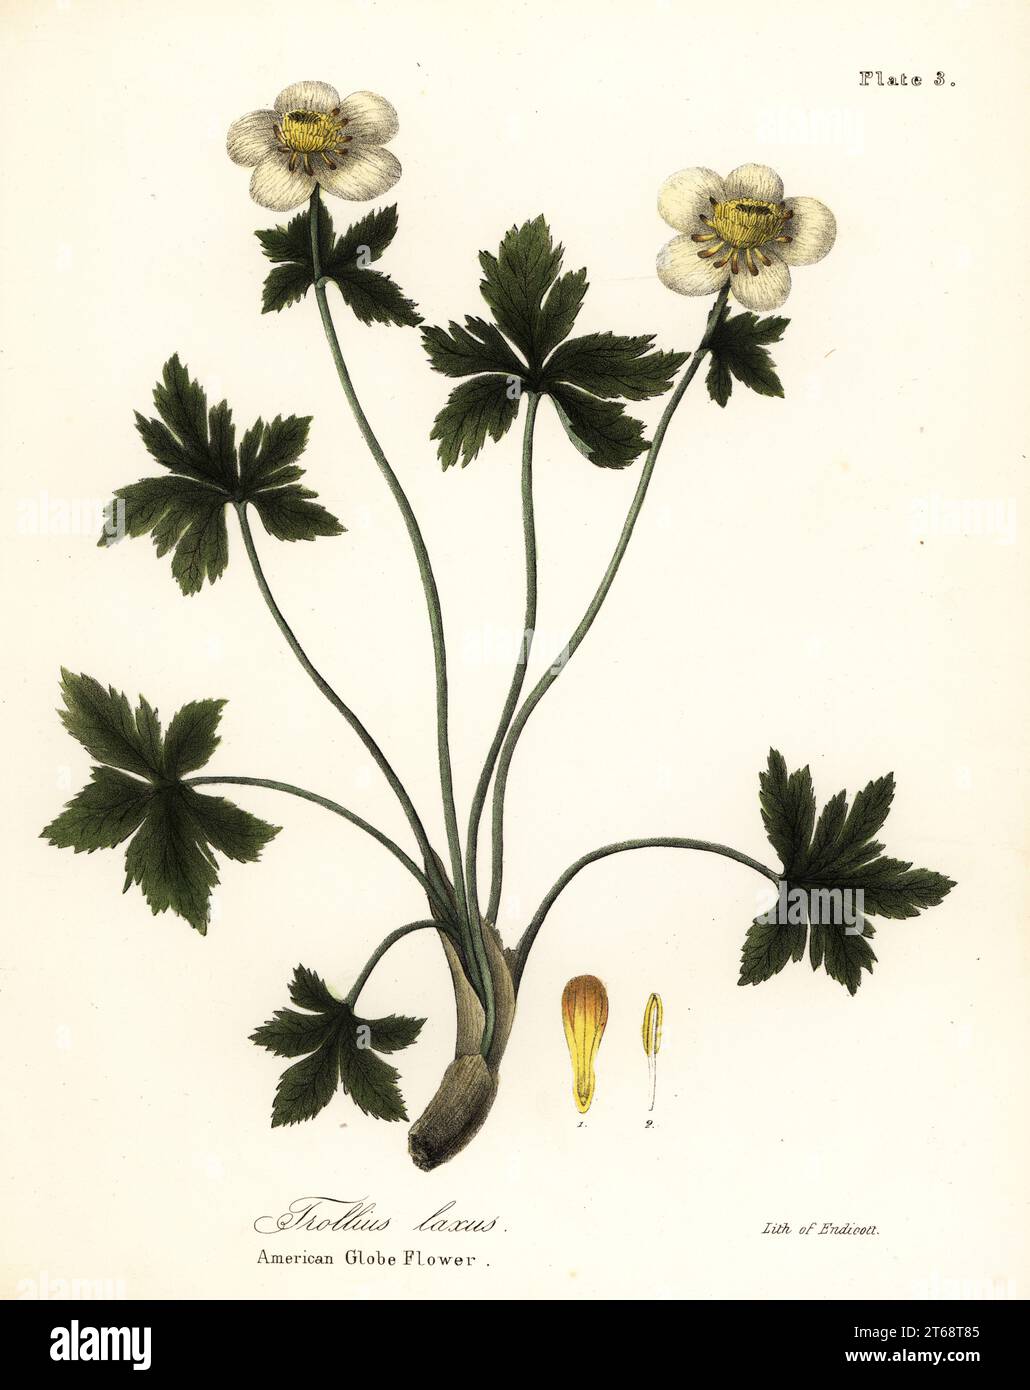 American globe flower or American spreading globeflower, Trollius laxus. Handcoloured lithograph by Endicott after a botanical illustration from John Torreys A Flora of the State of New York, Carroll and Cook, Albany, 1843. The plates drawn by John Torrey, Agnes Mitchell, Elizabeth Paoley and Swinton. John Torrey was an American botanist, chemist and physician 1796-1873. Stock Photo